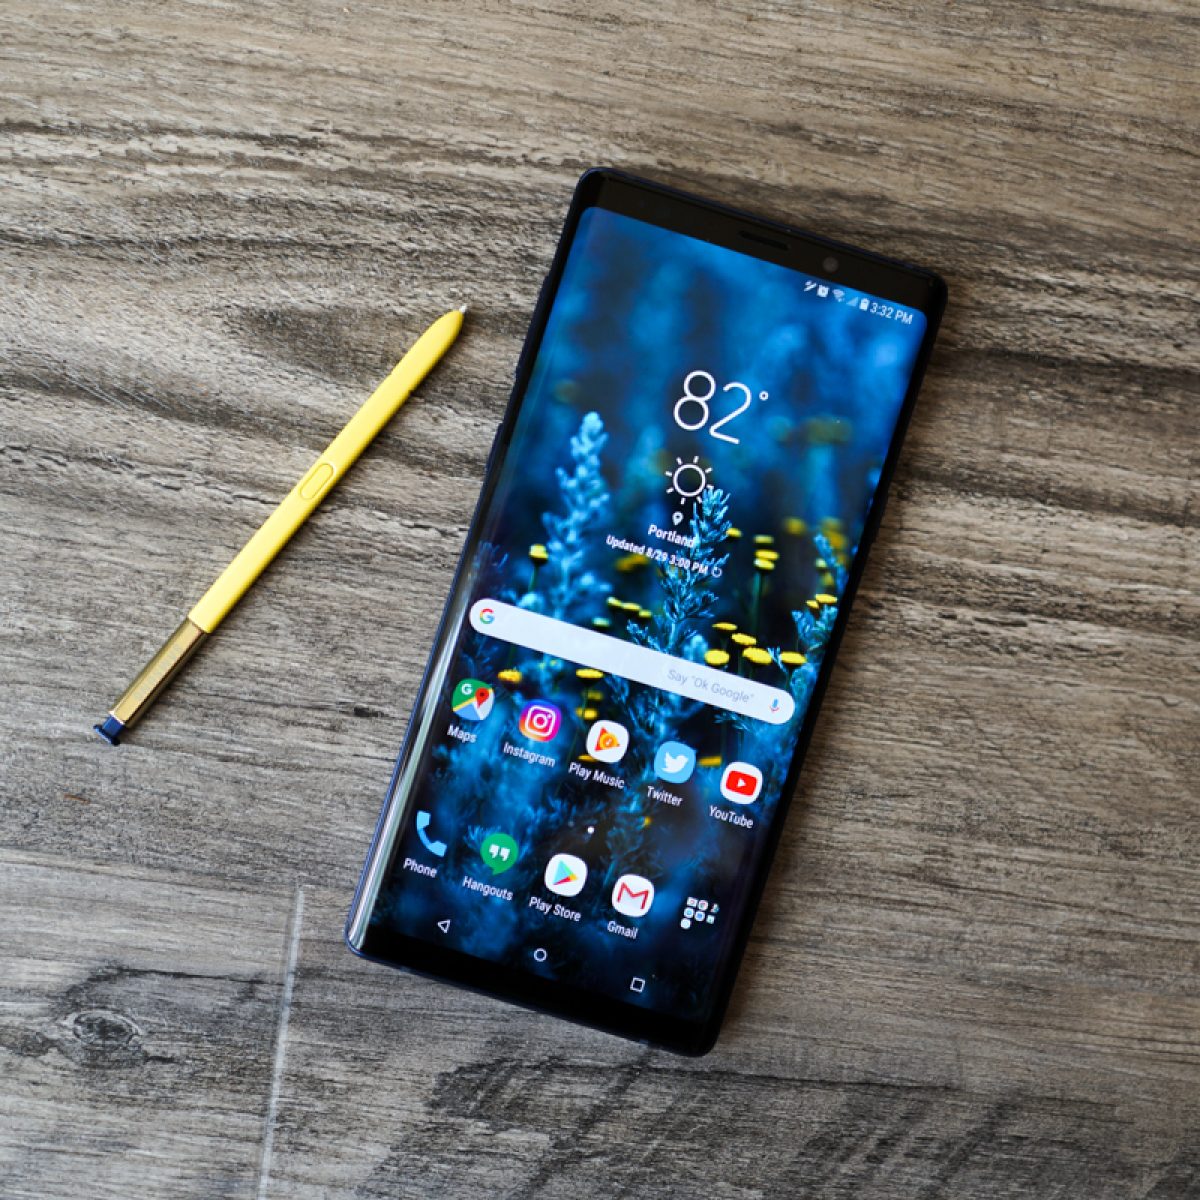 Galaxy note обзор. Галакси ноут 9. Samsung s9 Note. Самсунг нот 23. Samsung Note 9 Pro.